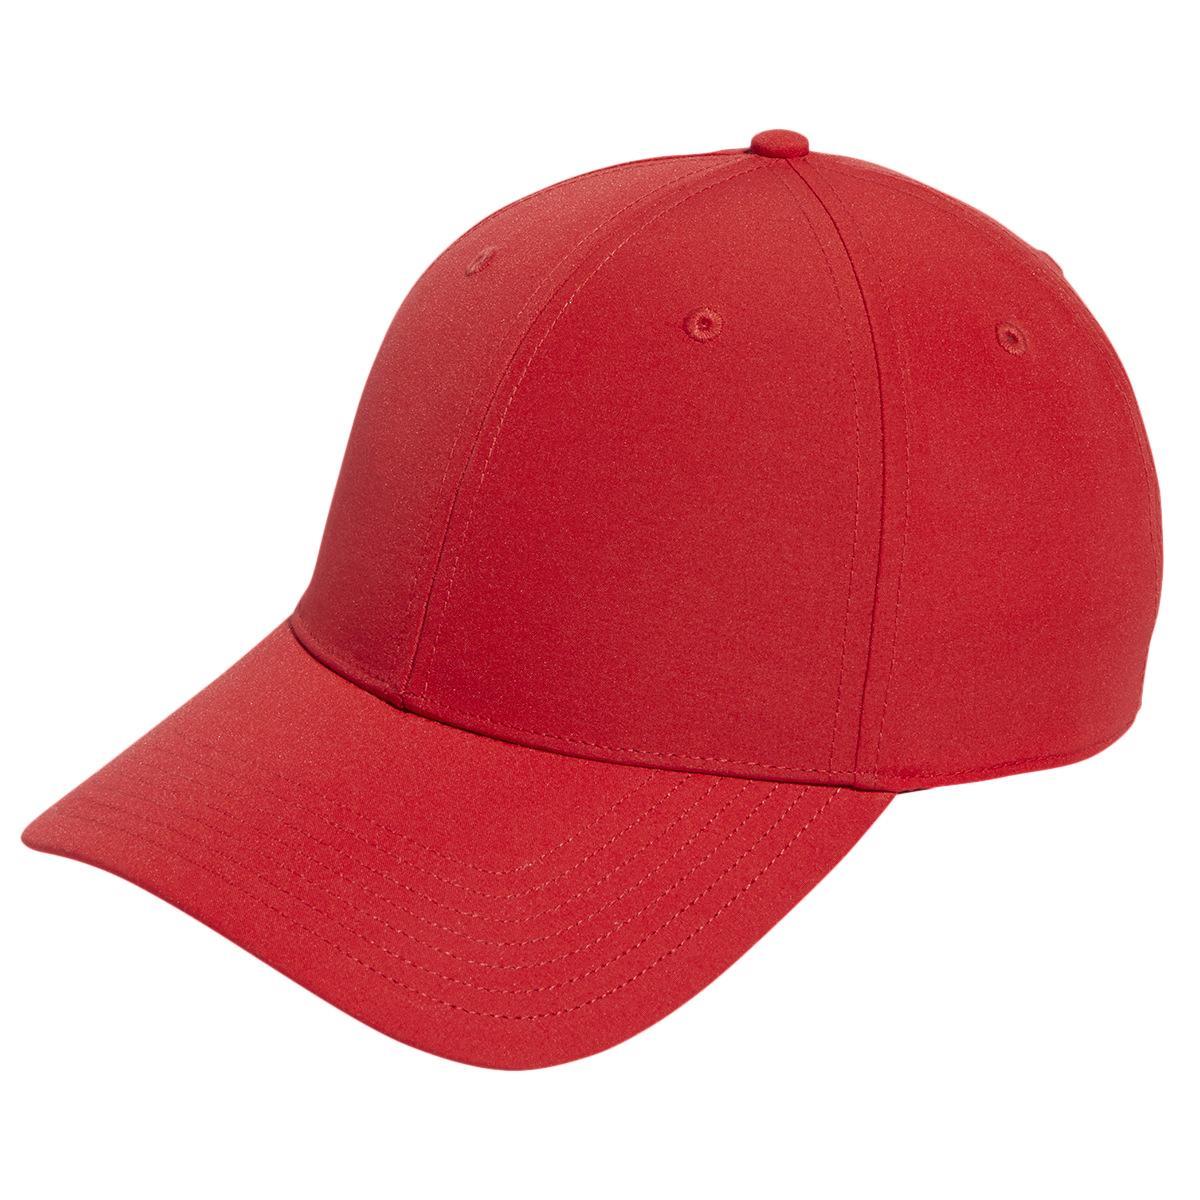 Adidas Unisex Adult Crestable Performance Golf Cap (Red) (One Size)